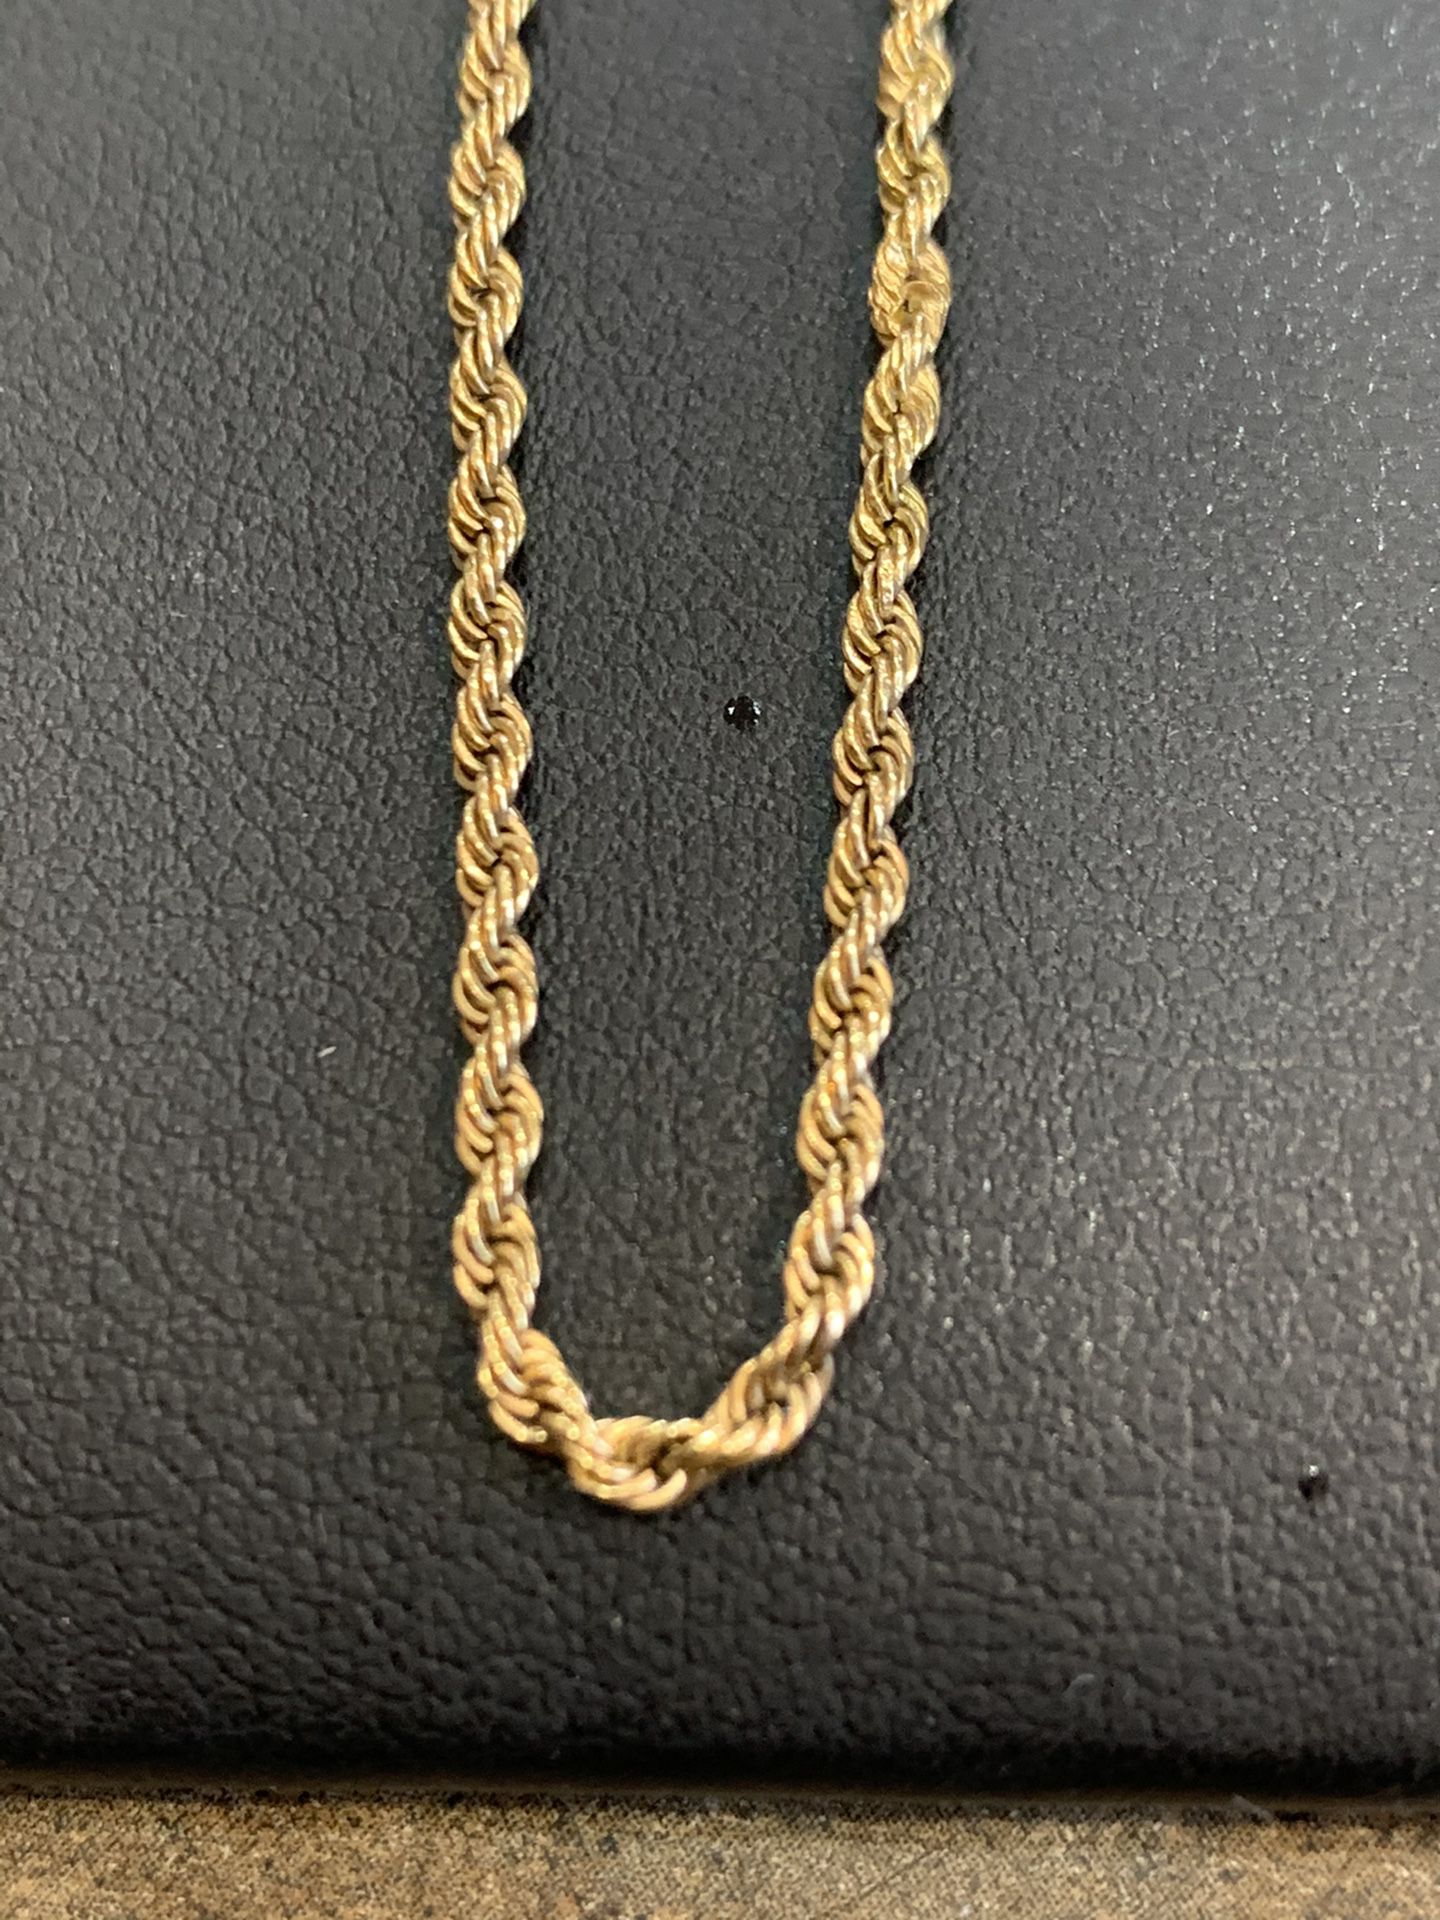 28” GOLD ROPE CHAIN 14KT 4.1G